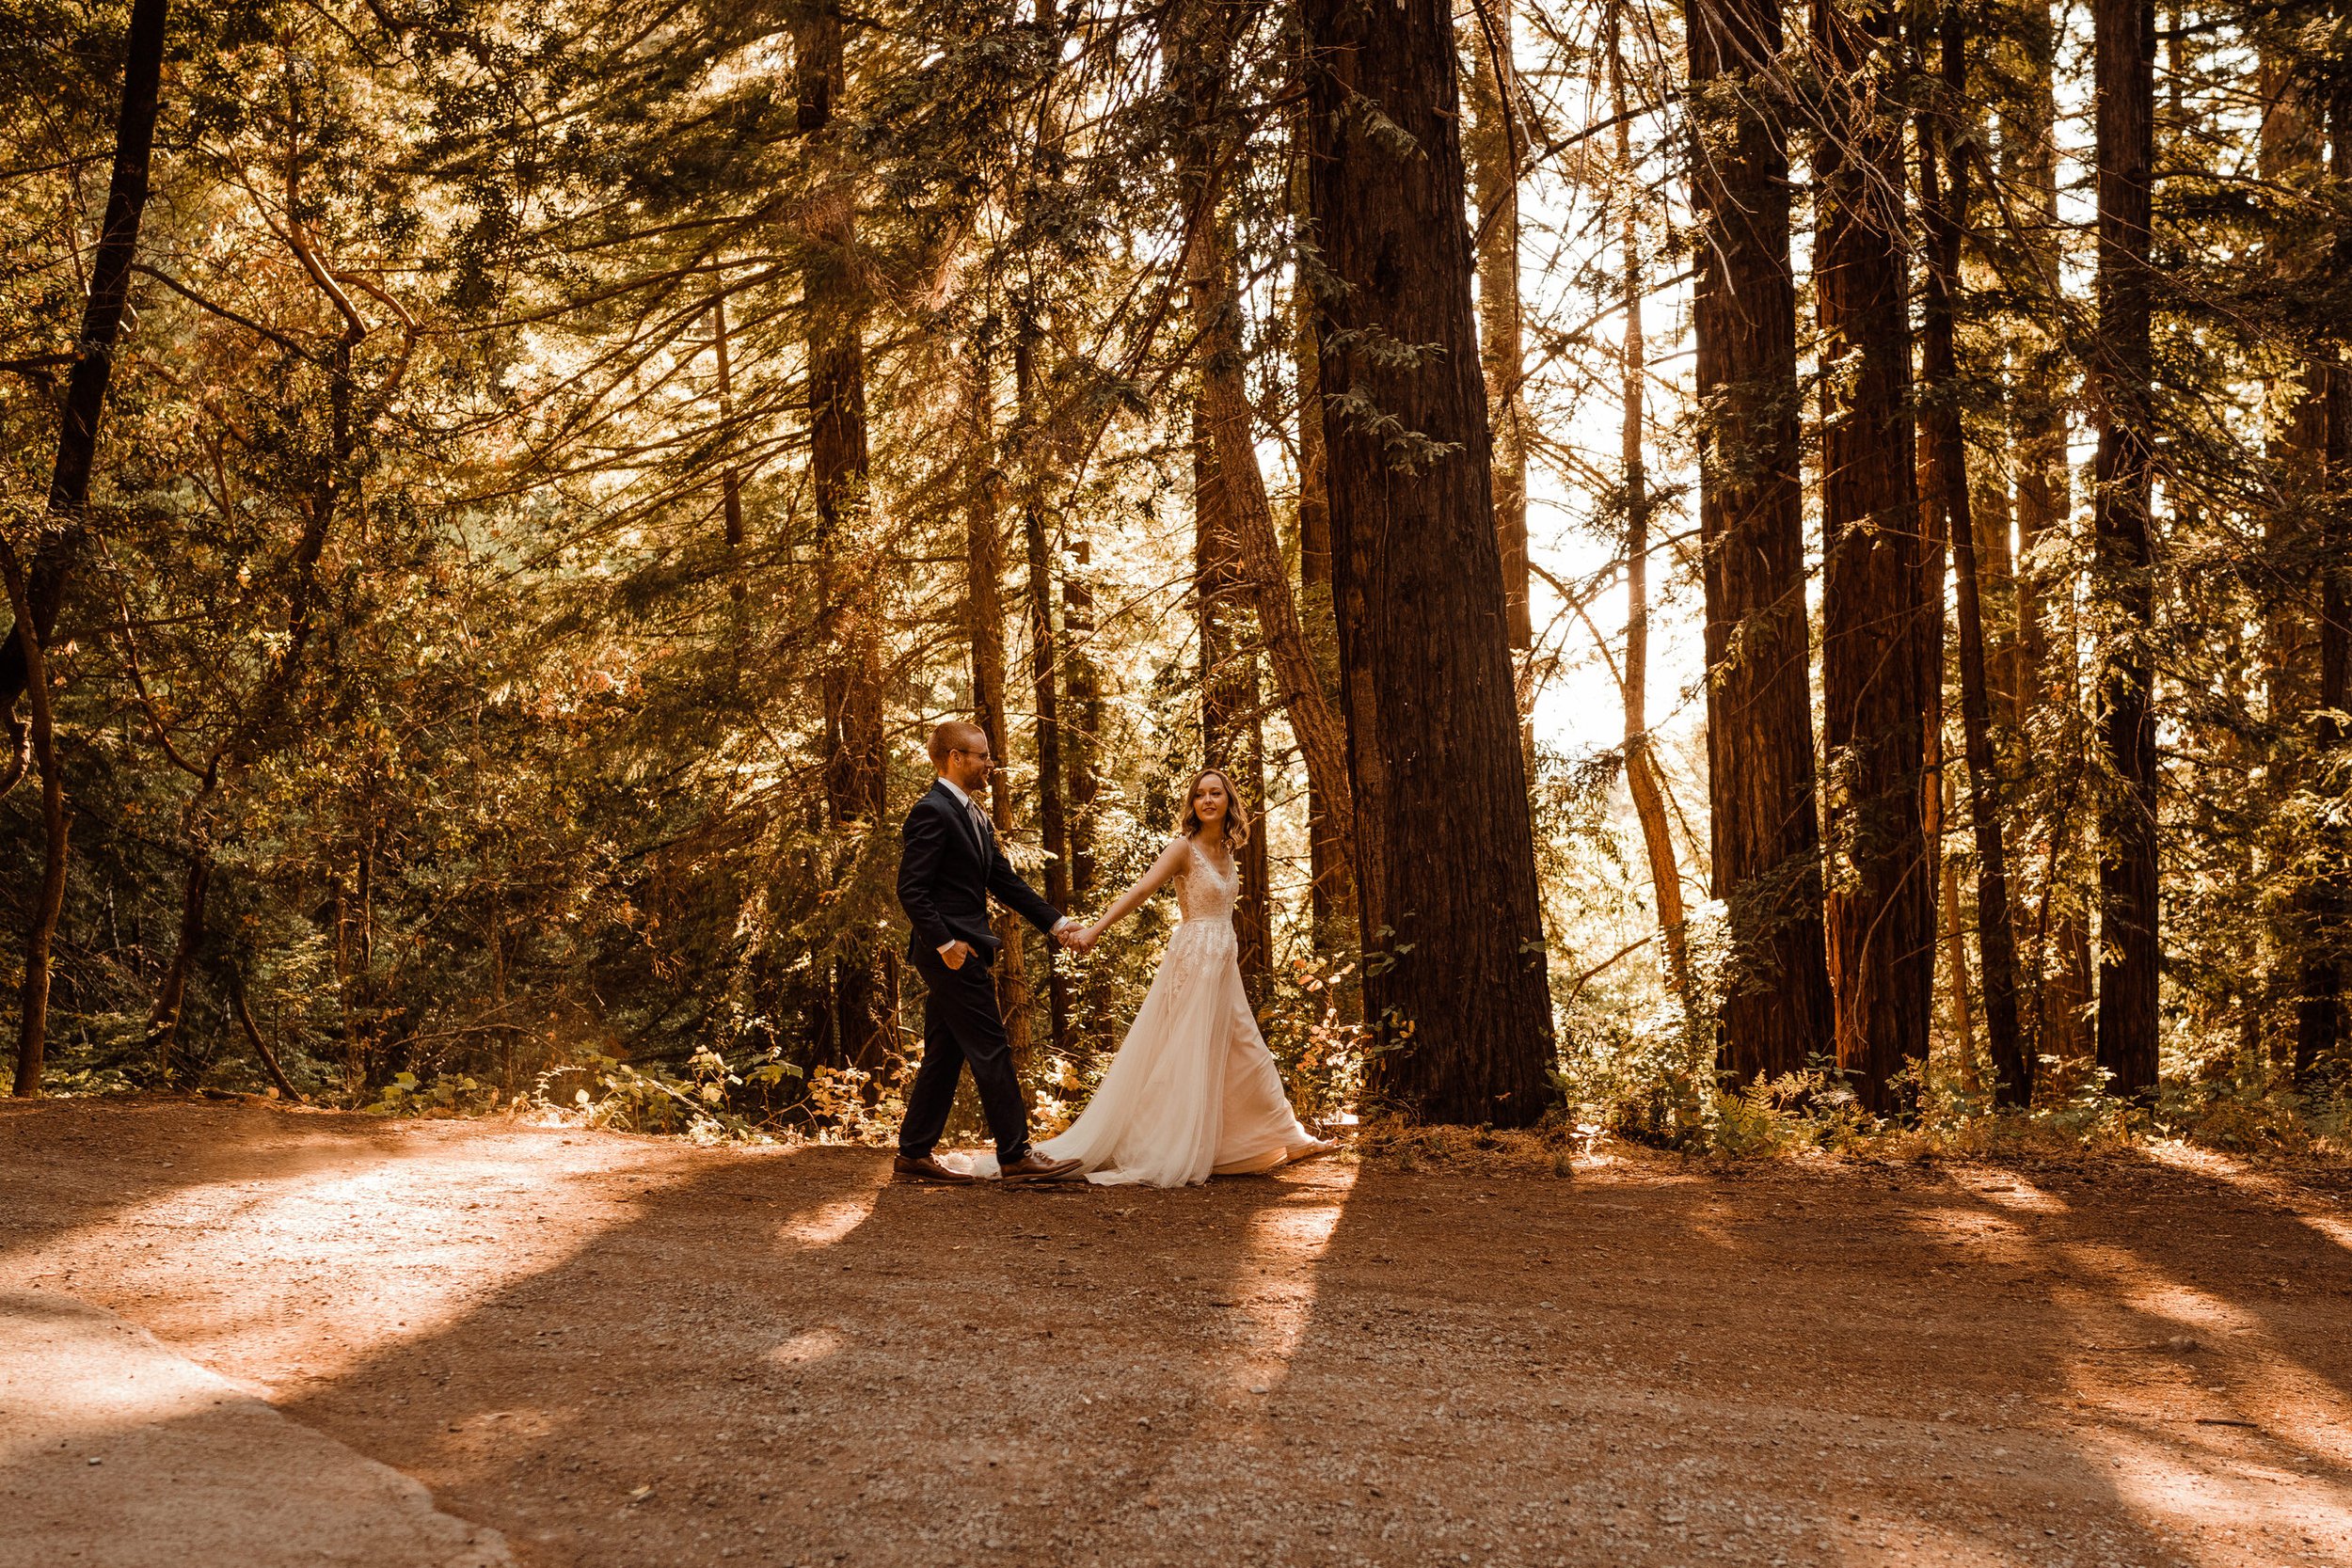 Wedding-in-the-Woods-Bride-and-Groom-Sunlit-Pictures-Beneath-Redwood-Forest (26).jpg